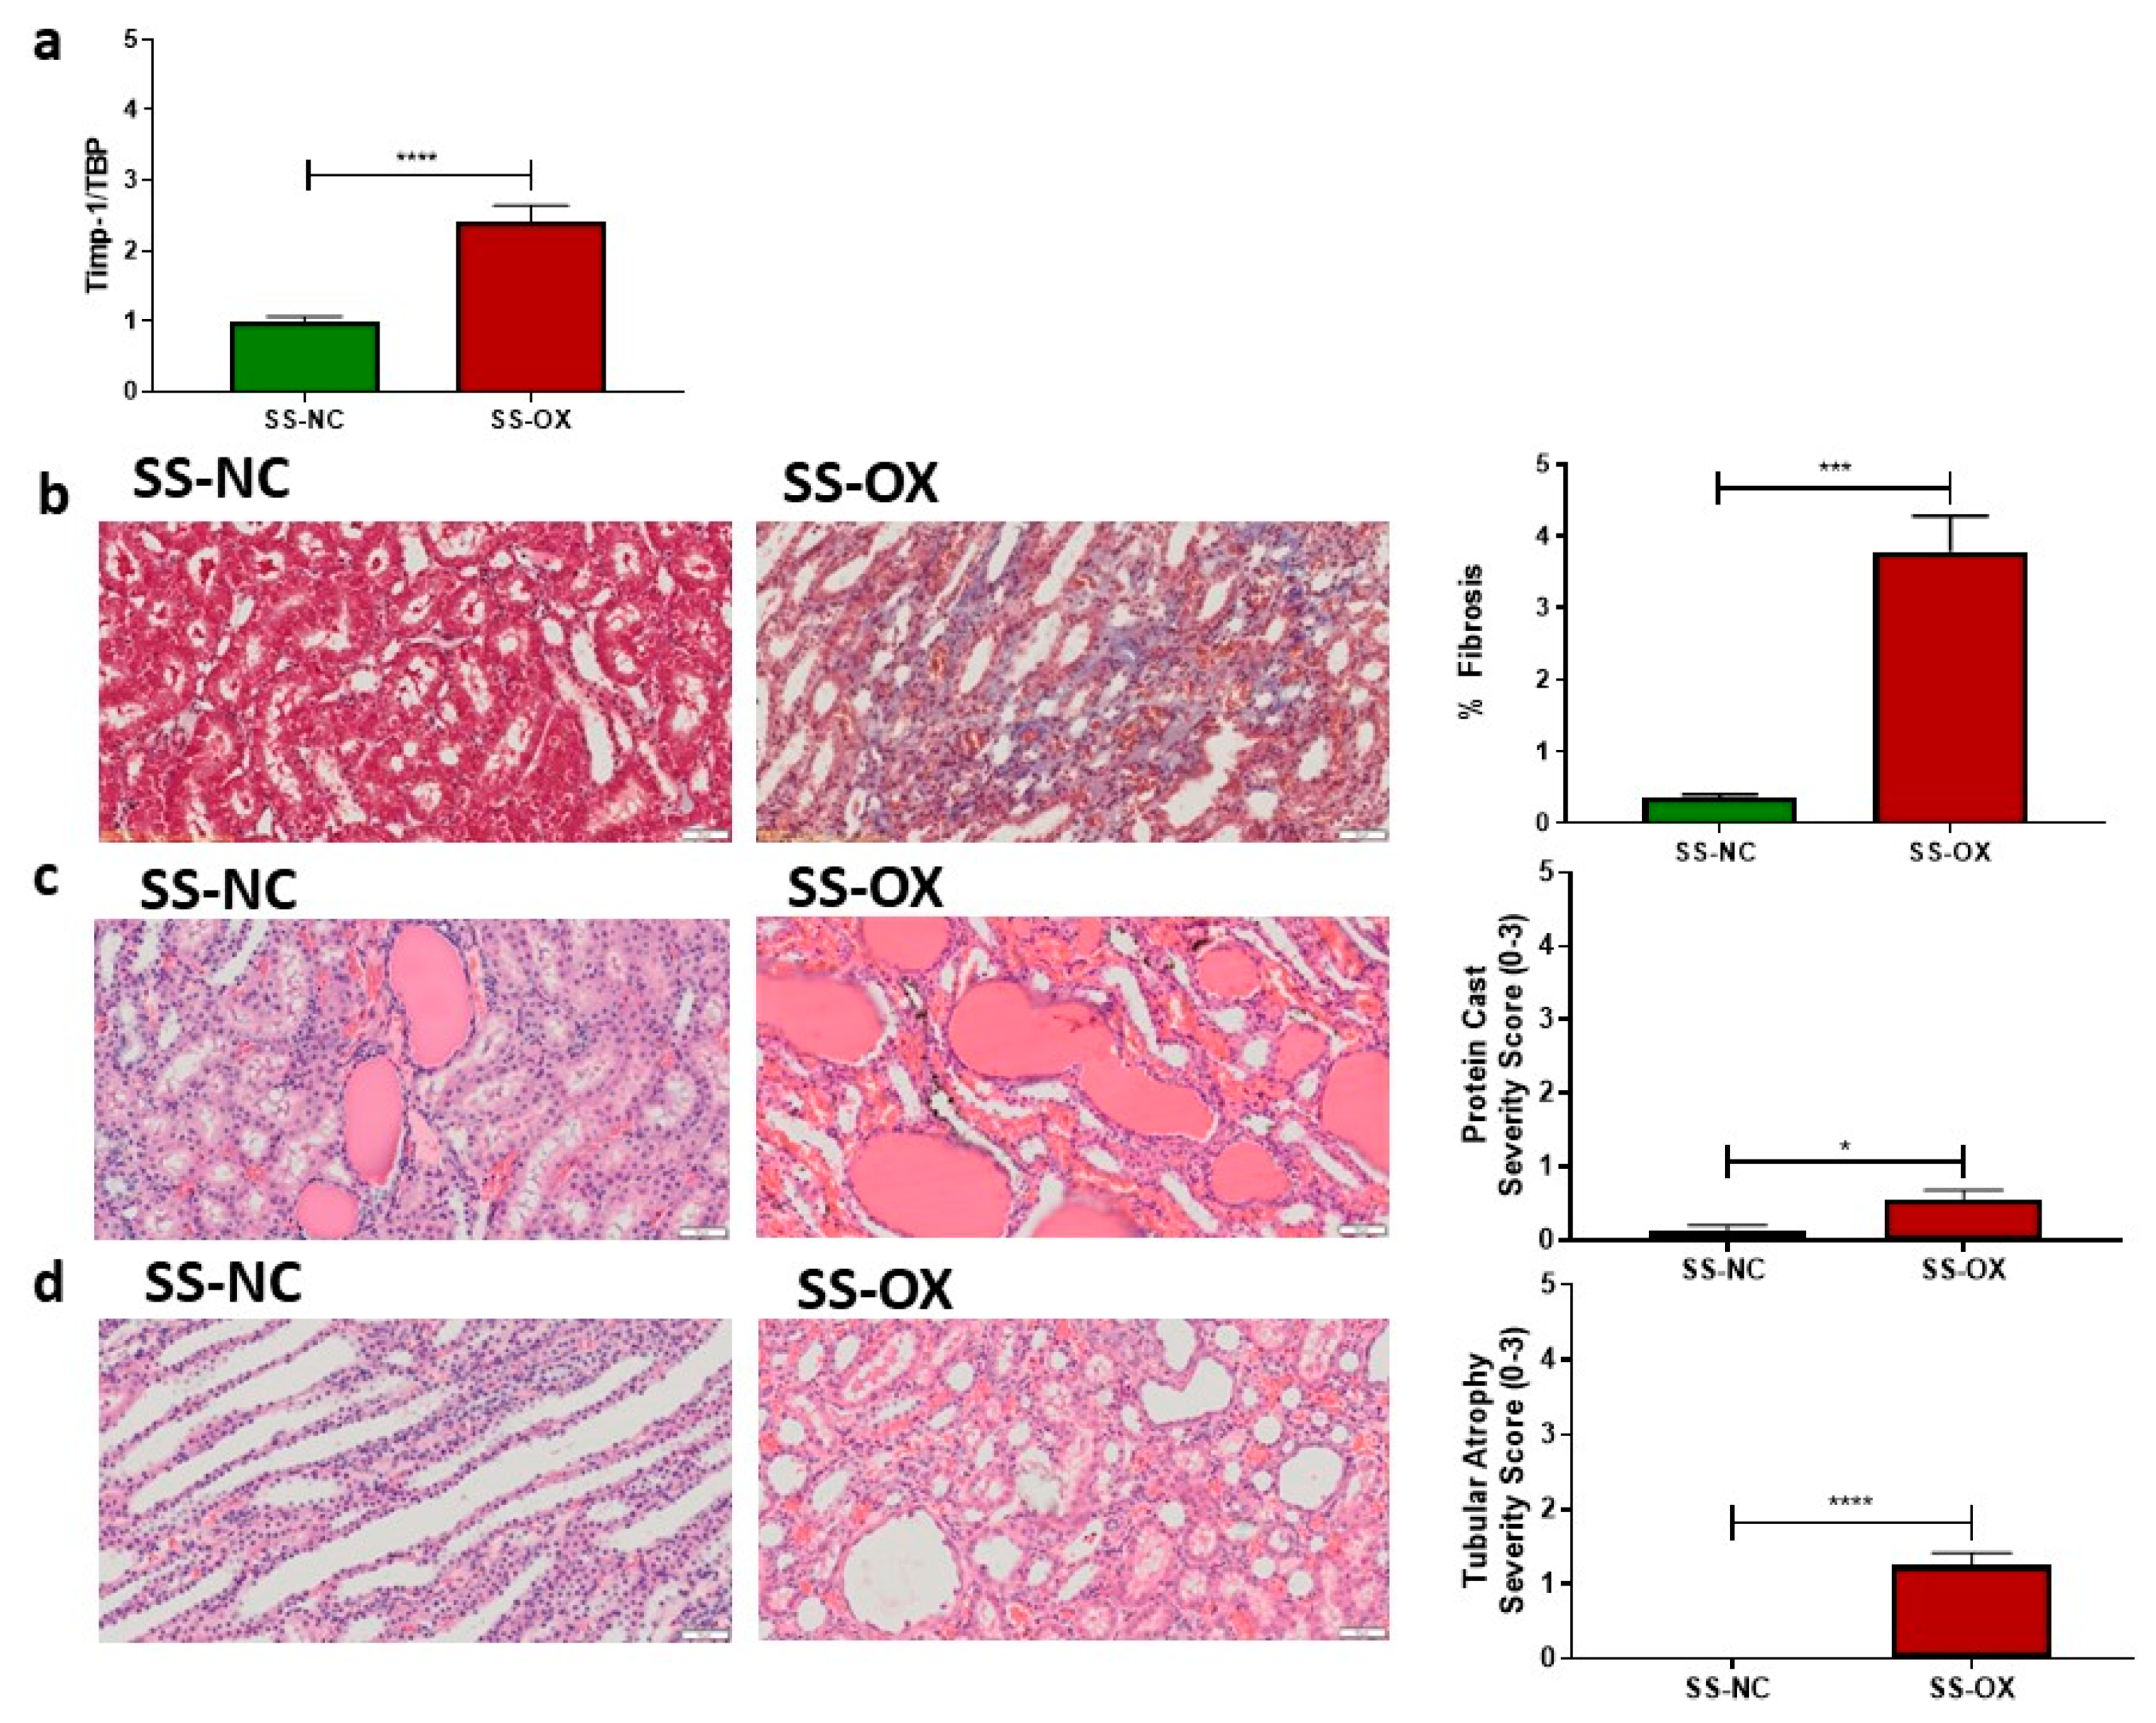 High Dietary Protein Exacerbates Hypertension and Renal Damage in Dahl SS  Rats by Increasing Infiltrating Immune Cells in the Kidney